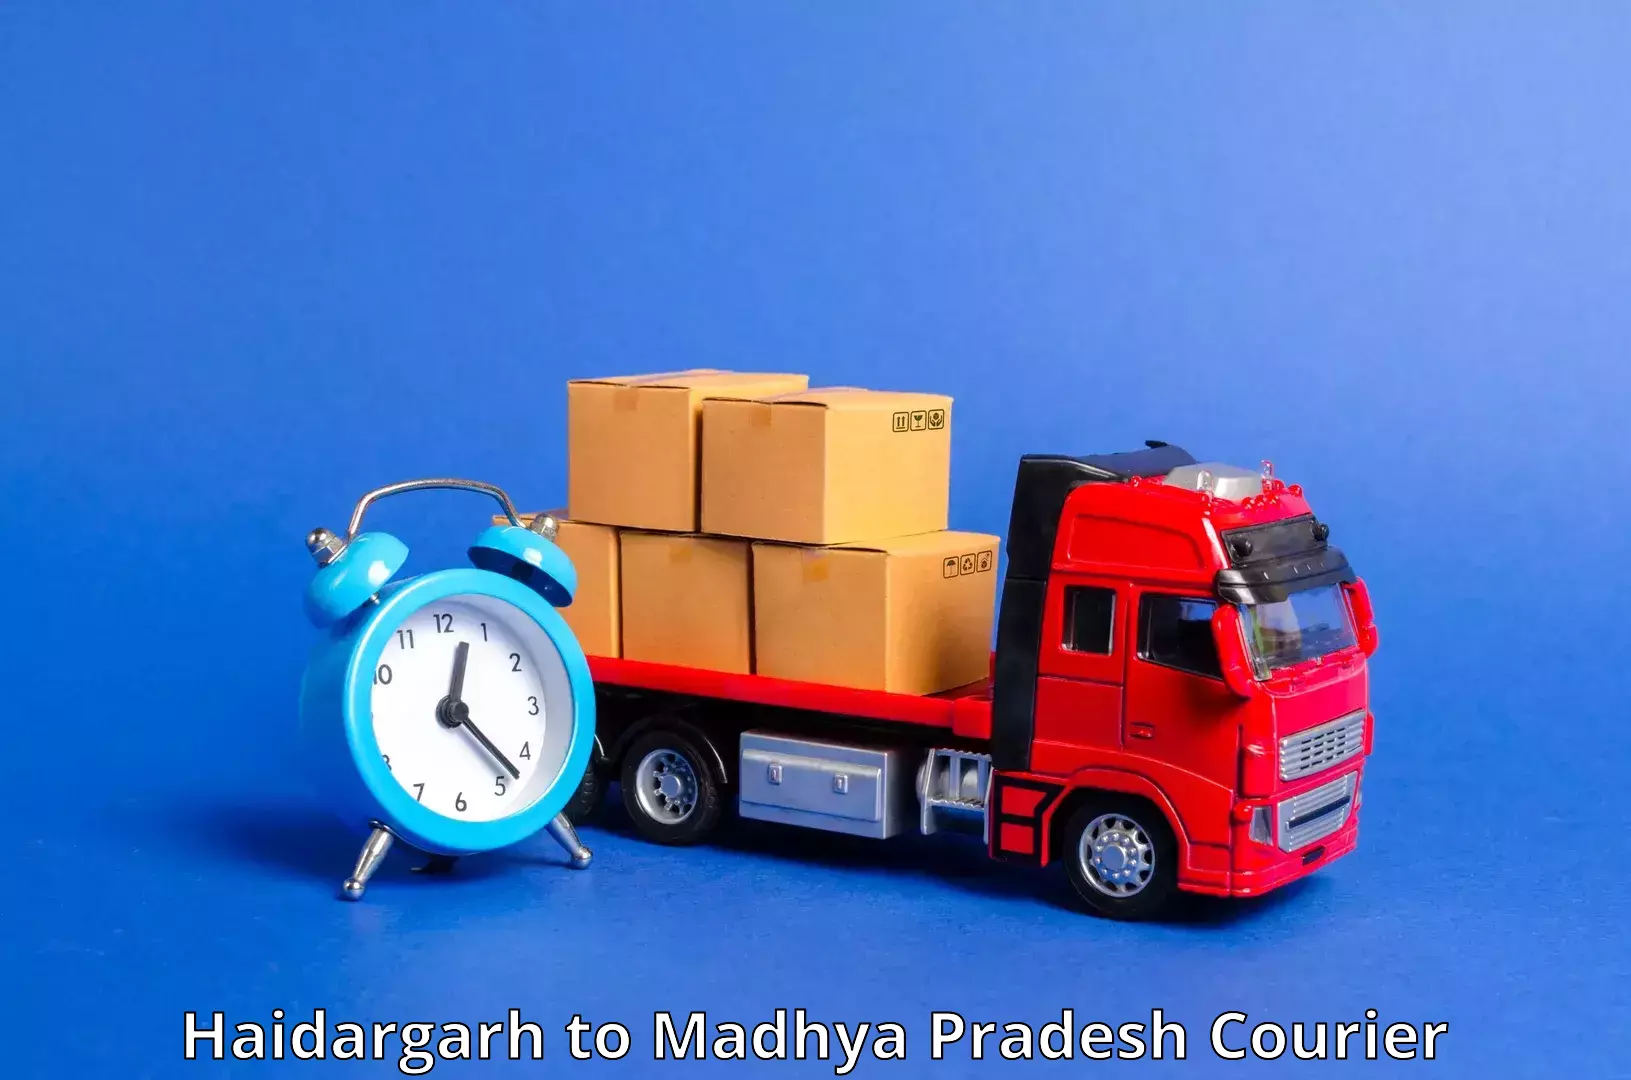 Global courier networks Haidargarh to Balaghat